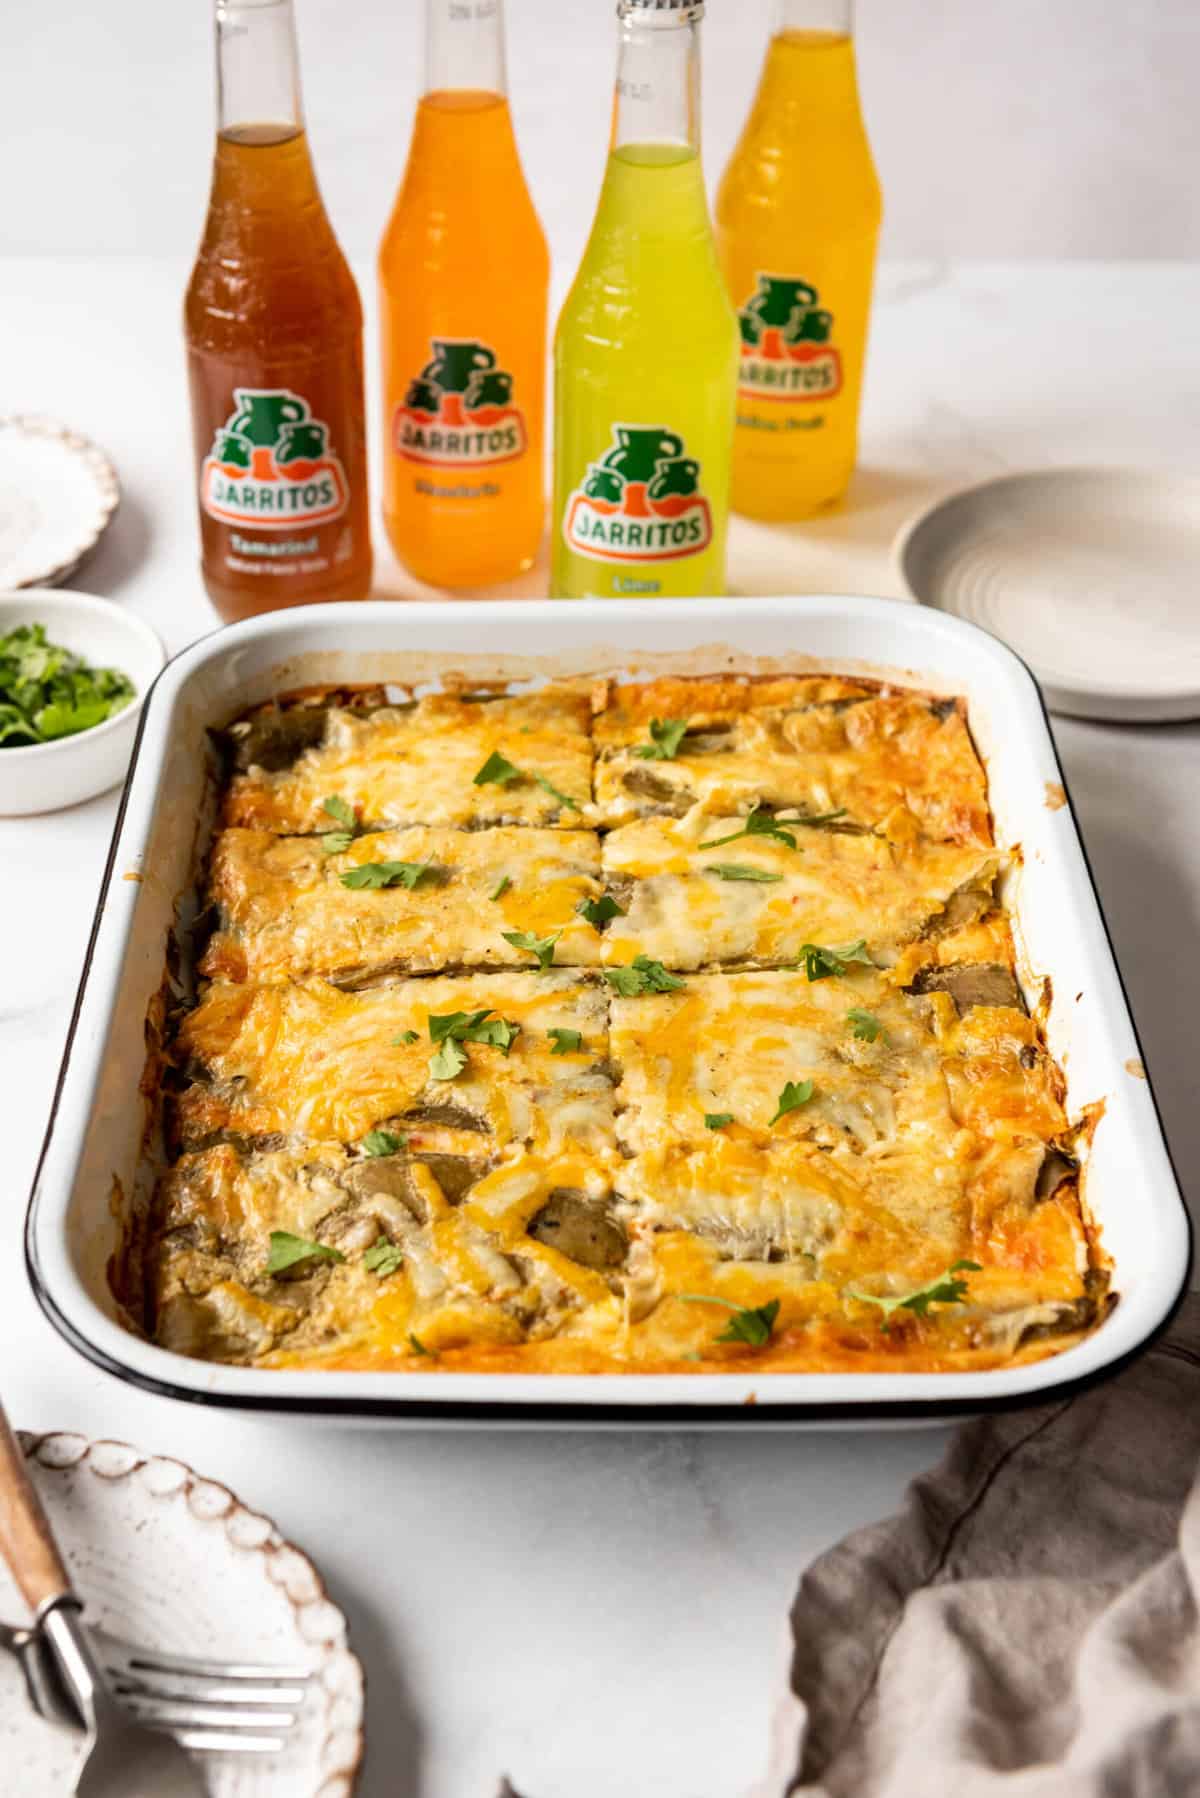 Easy chile rellenos casserole in a white baking dish in front of Mexican sodas.